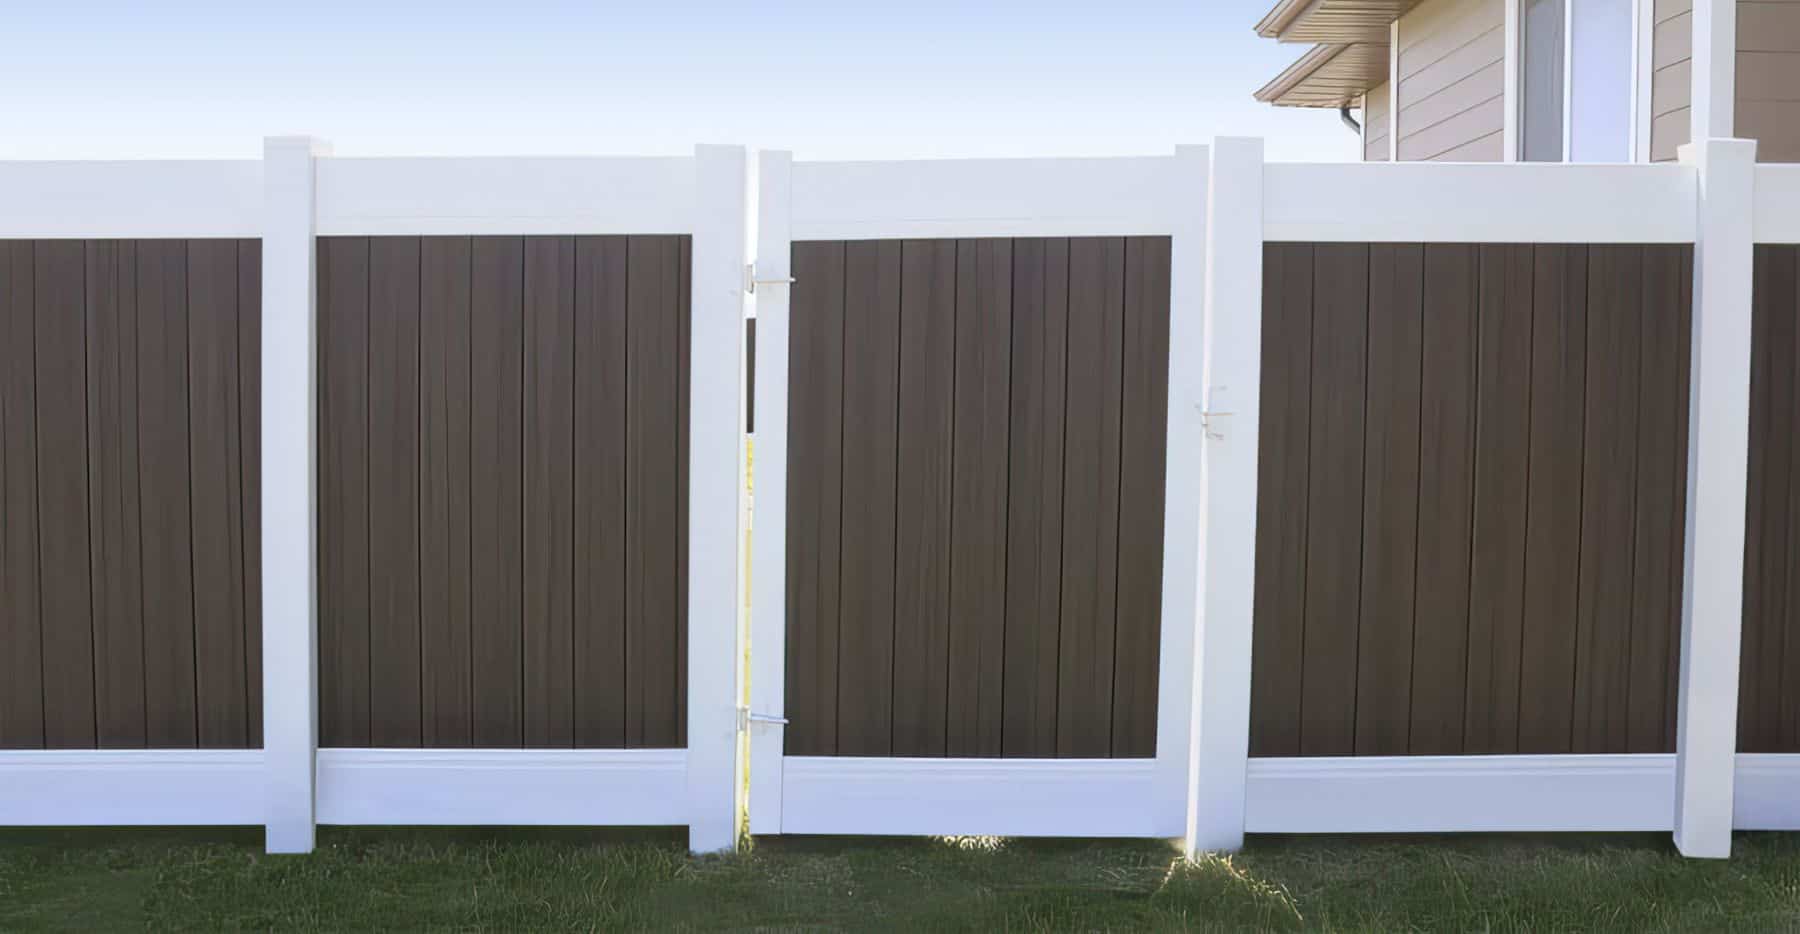 Brown vinyl fence with white borders and a gate on a grassy lawn in front of a modern suburban home.